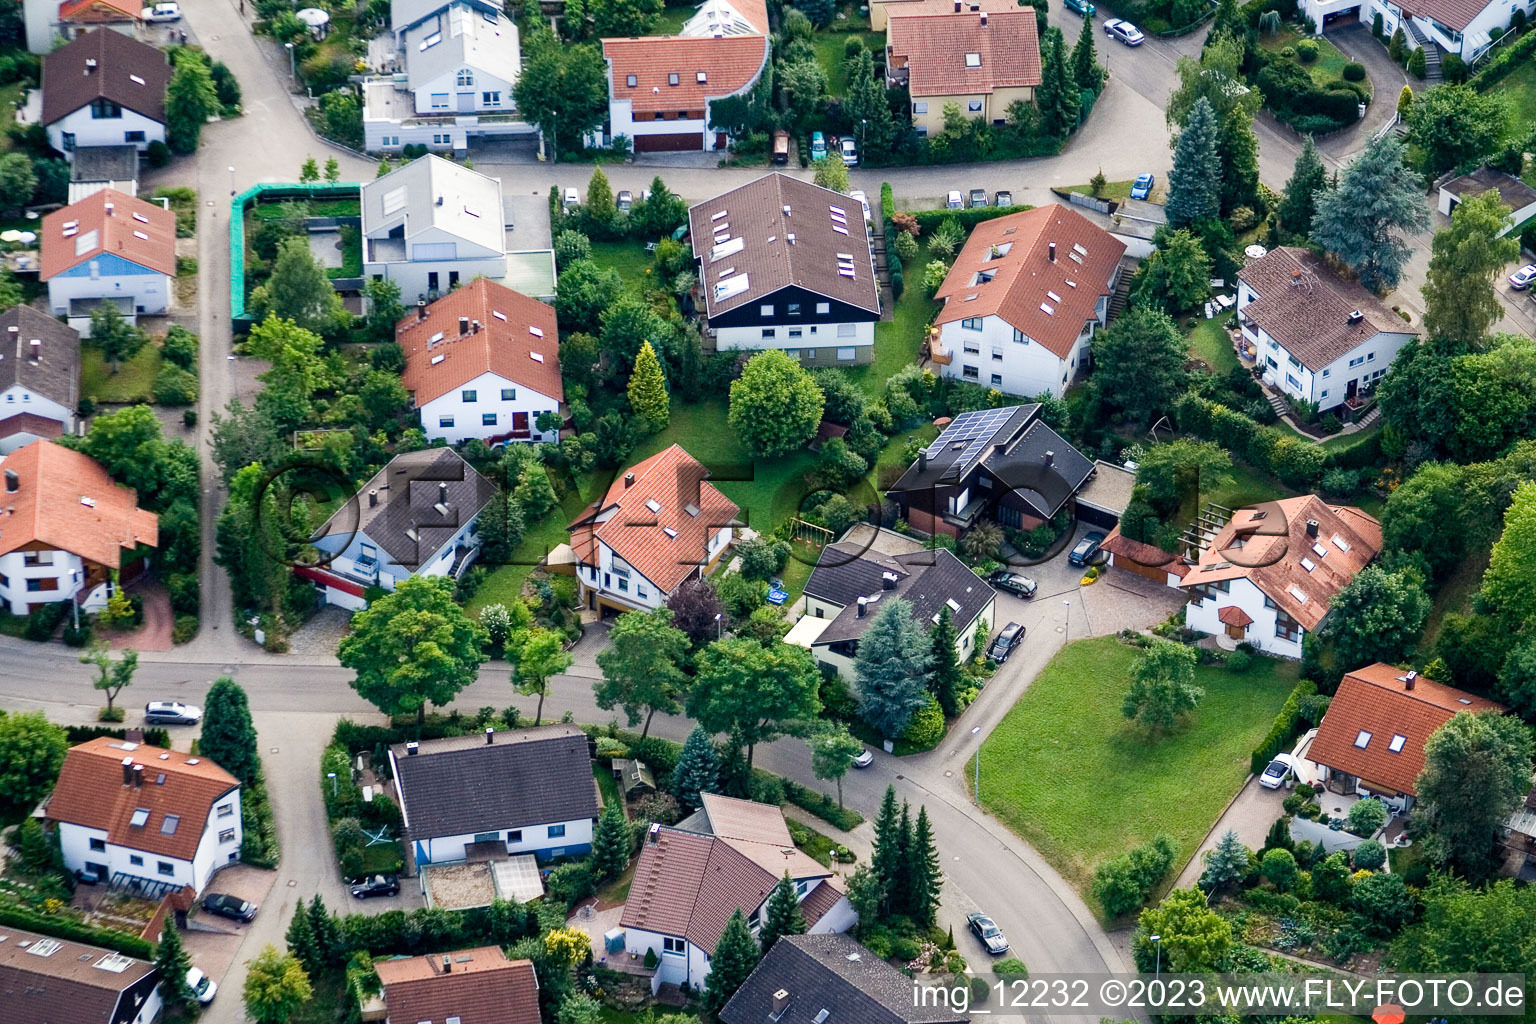 Ehbühl, Kirchhalde in Herrenberg in the state Baden-Wuerttemberg, Germany from the drone perspective